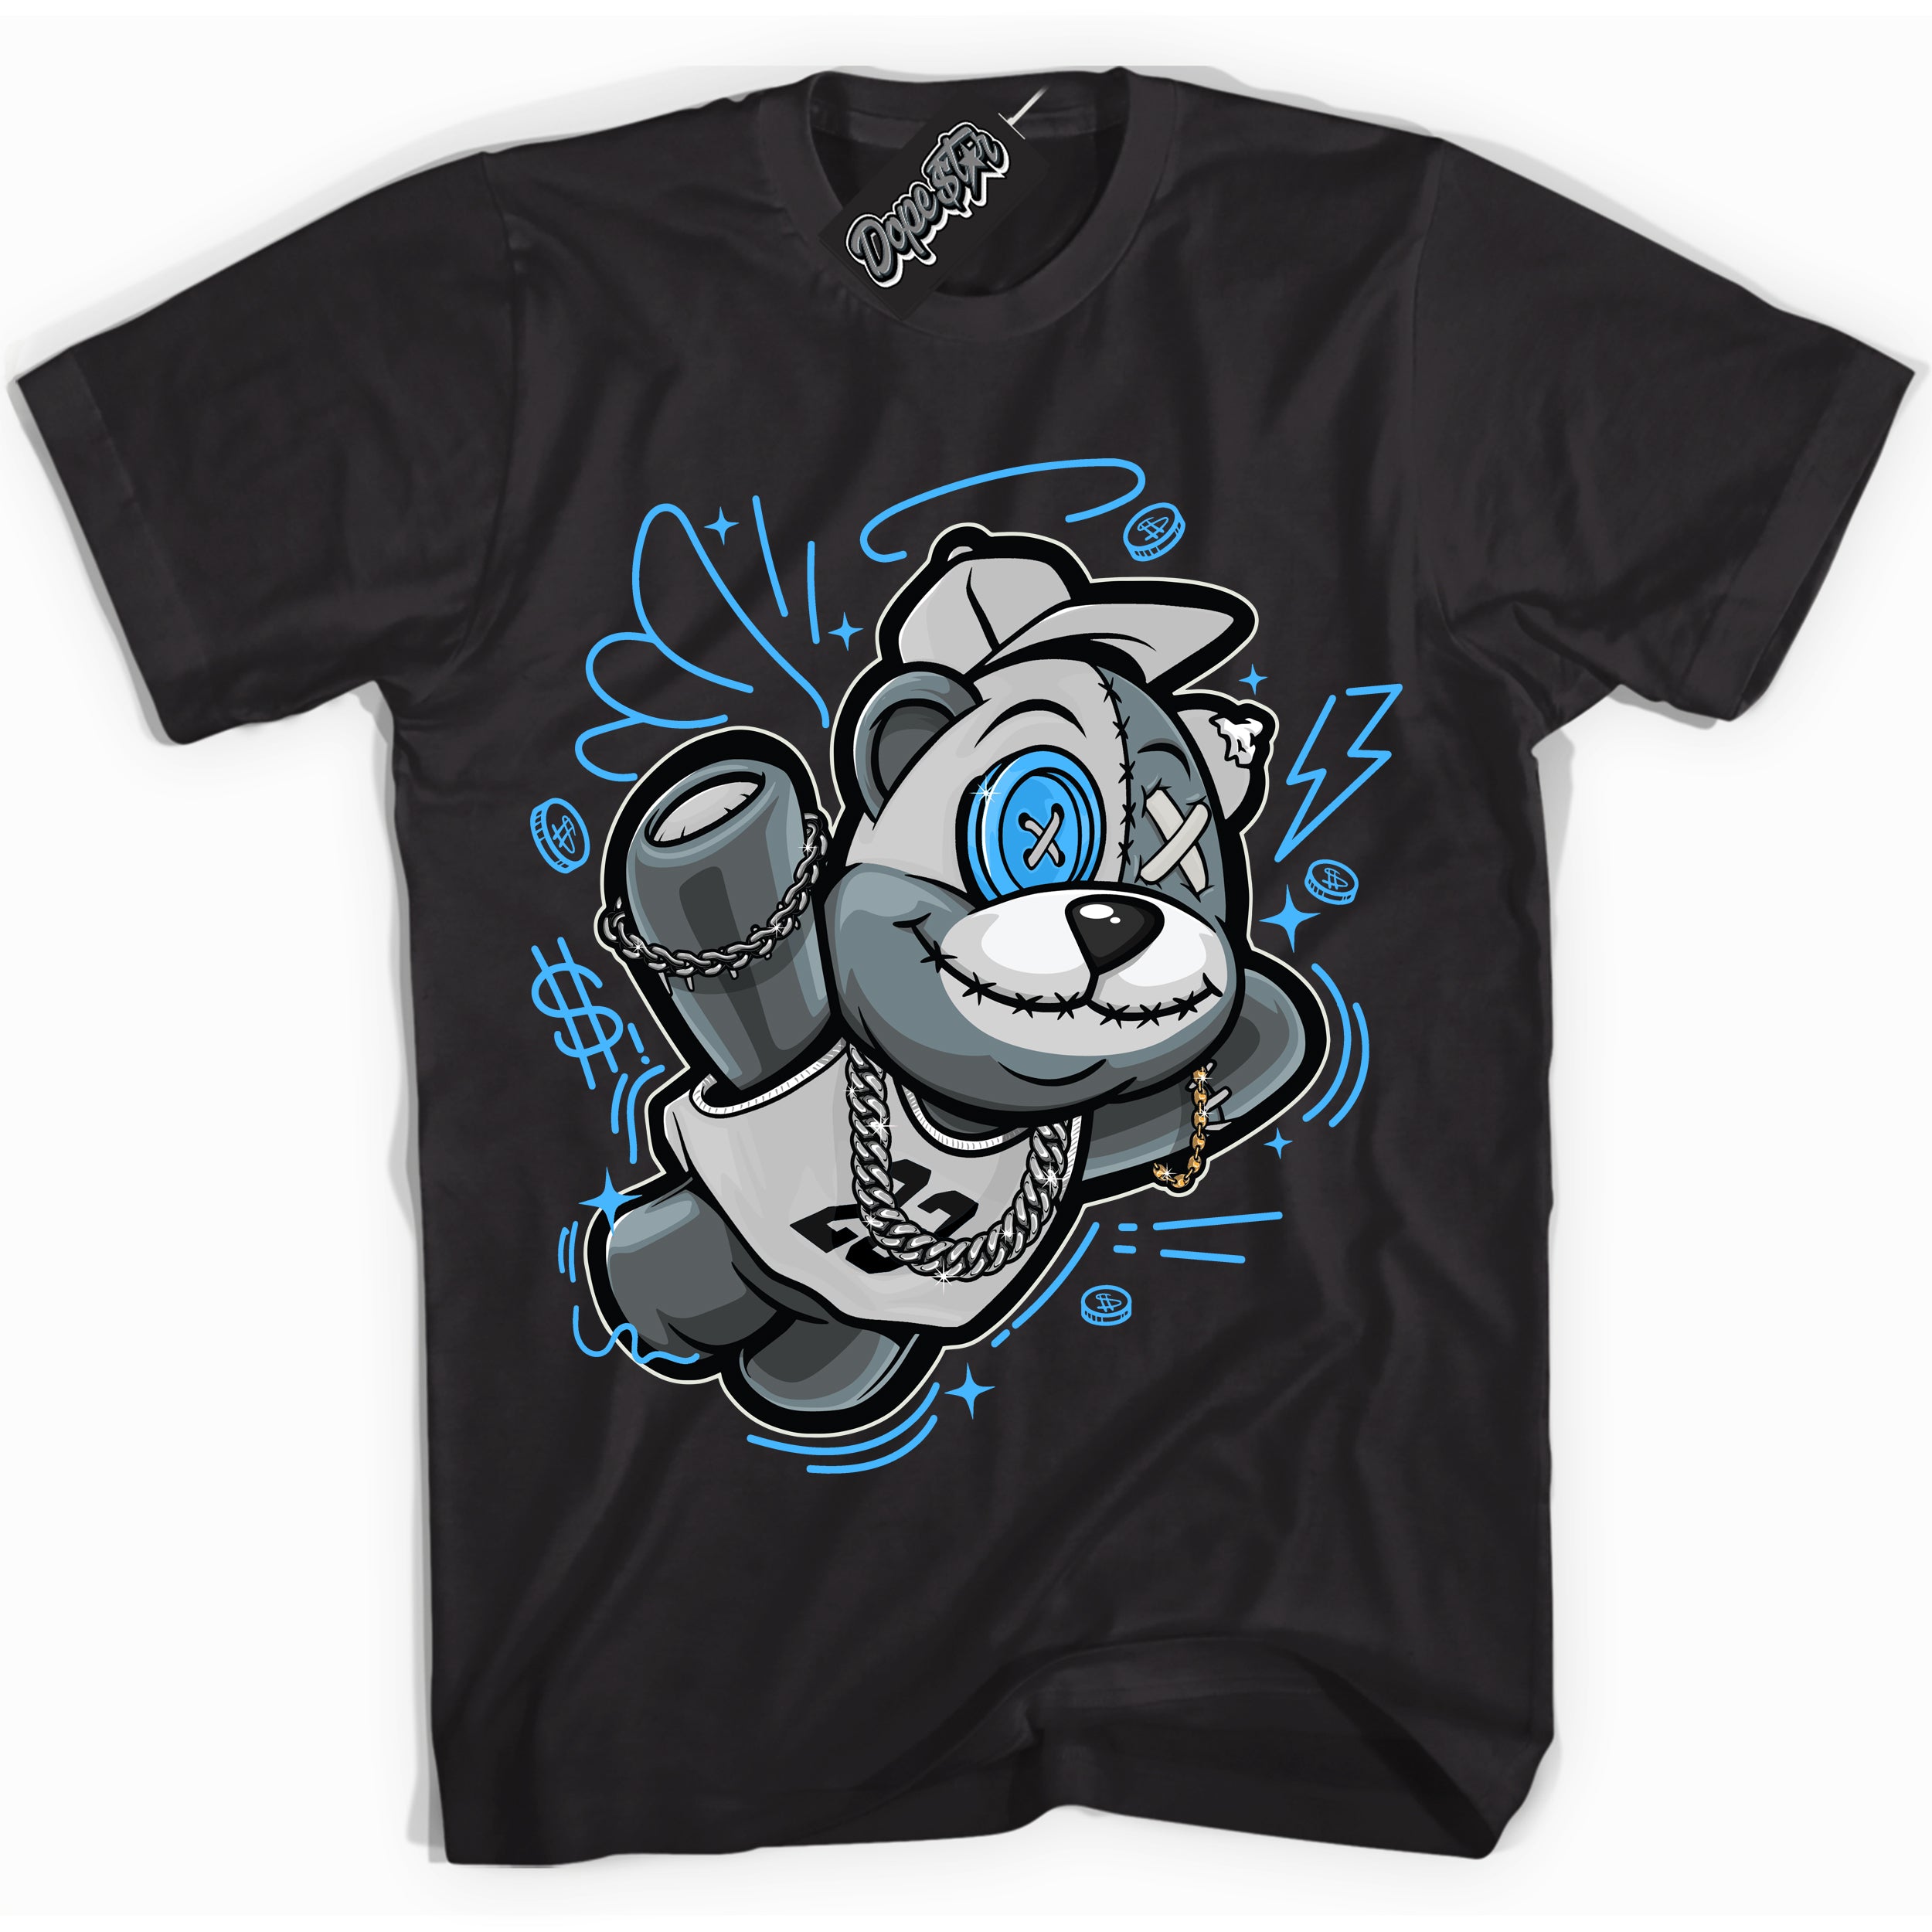 Cool Black graphic tee with “ Slam Dunk Bear ” design, that perfectly matches Powder Blue 9s sneakers 